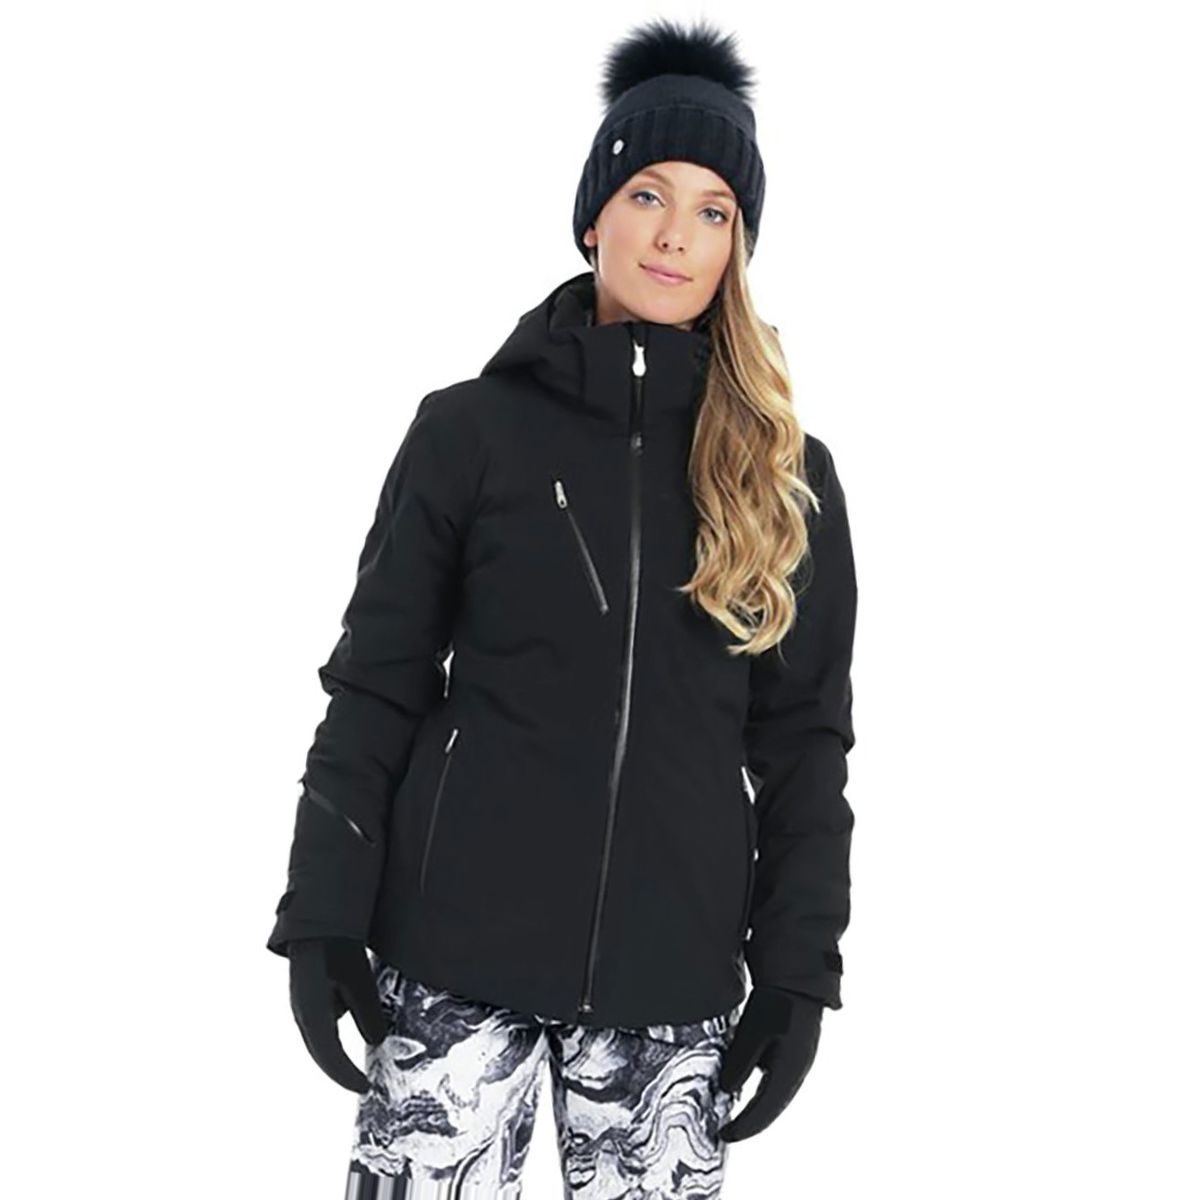 The 16 Best Ski Clothing for Ladies in 2019